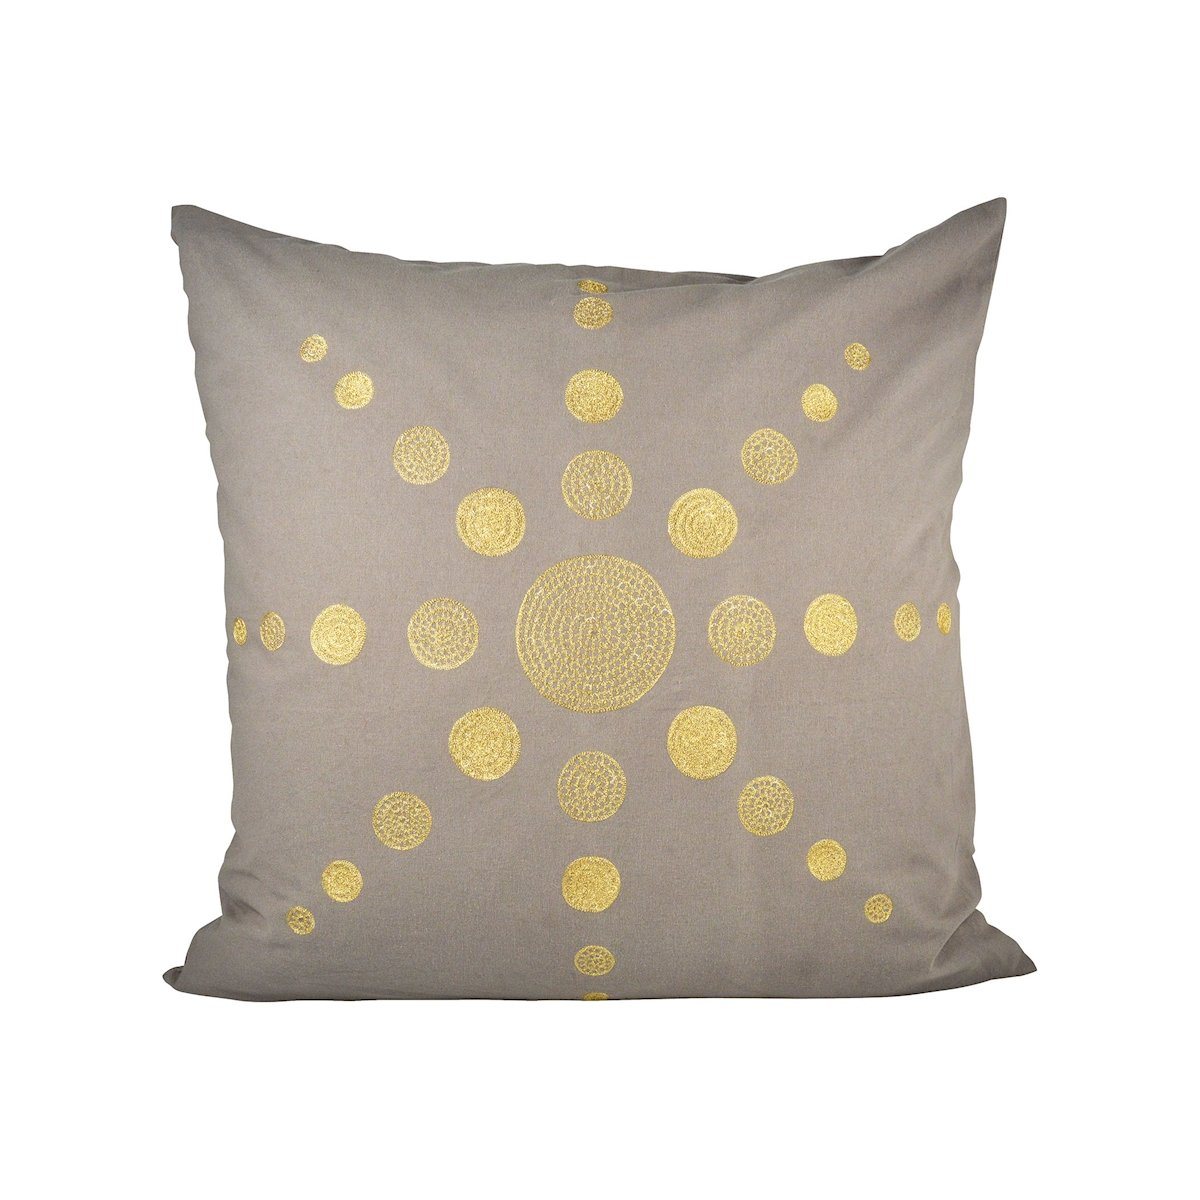 Andor 24x24 Pillow Accessories Pomeroy 